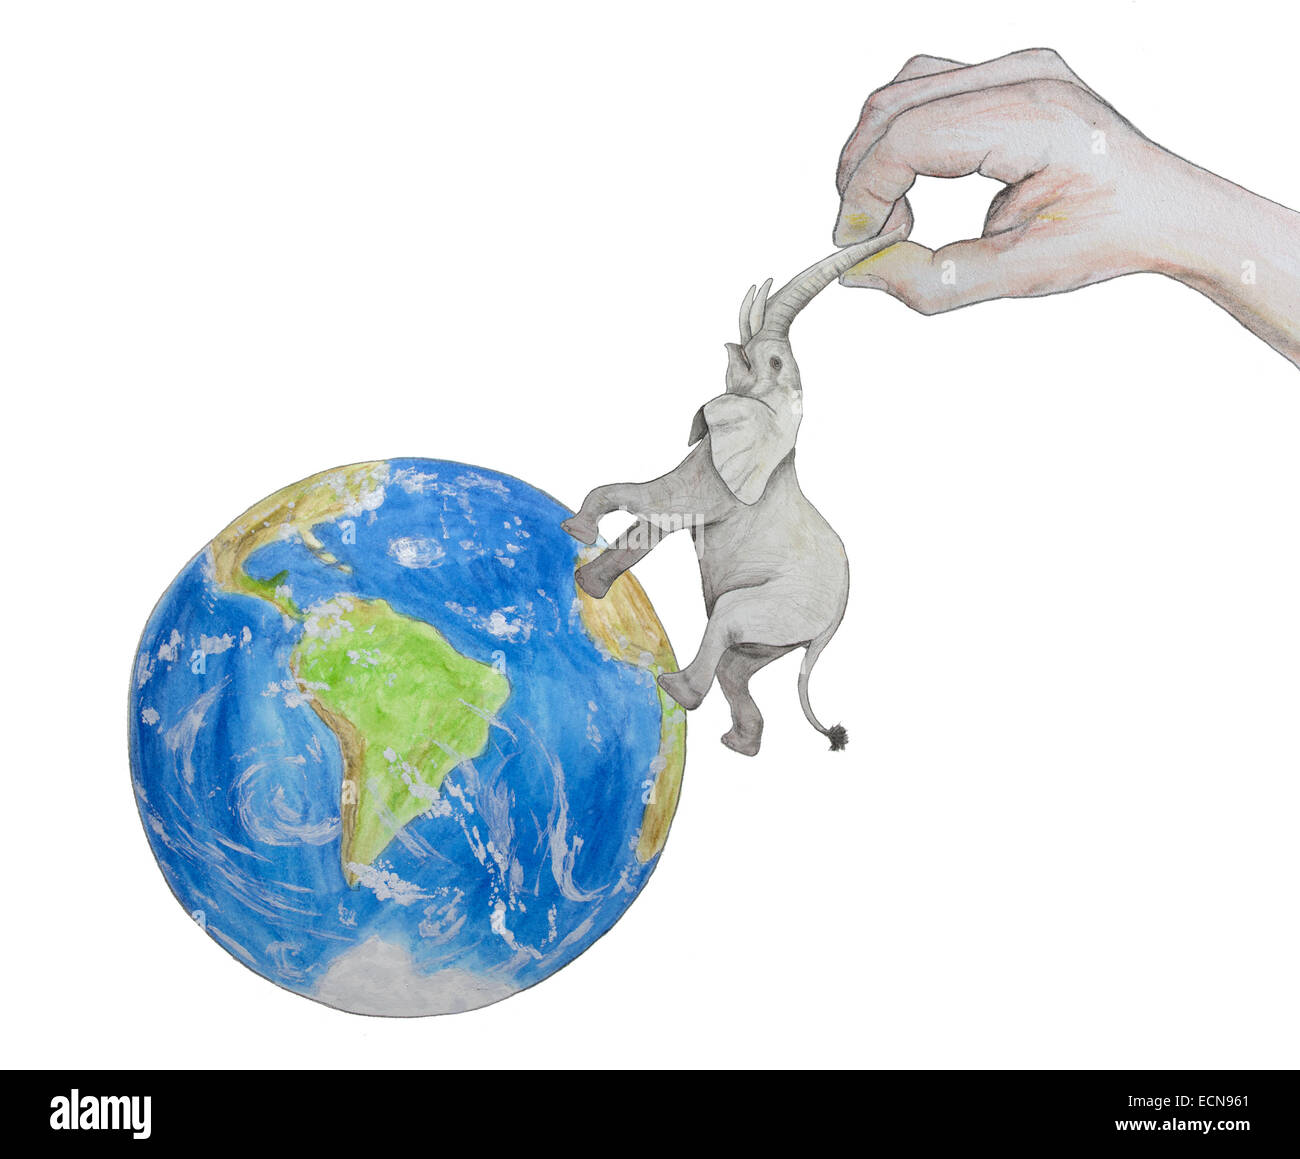 Human hand moves away elephant from planet earth Stock Photo